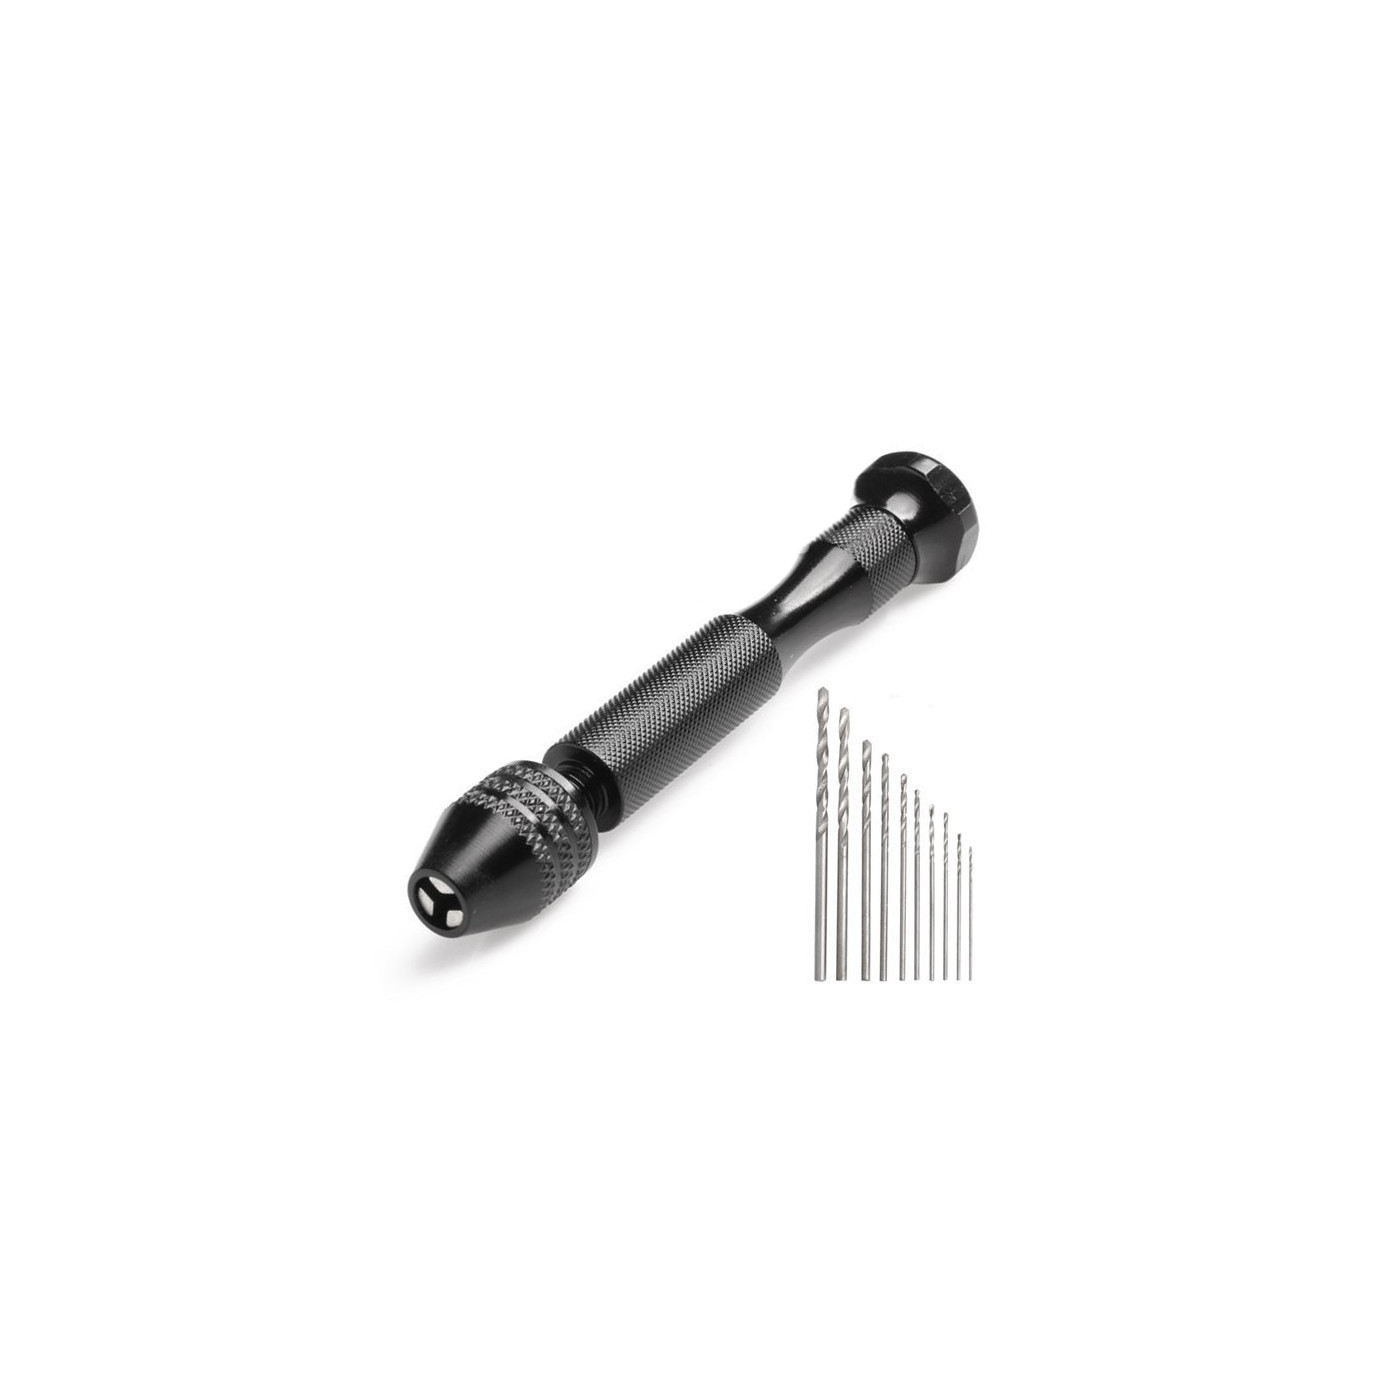 HSS Foret Fraise Mèche Perceuse Perçage Drill Bits Outil 6-16mm Extra Long 350mm 